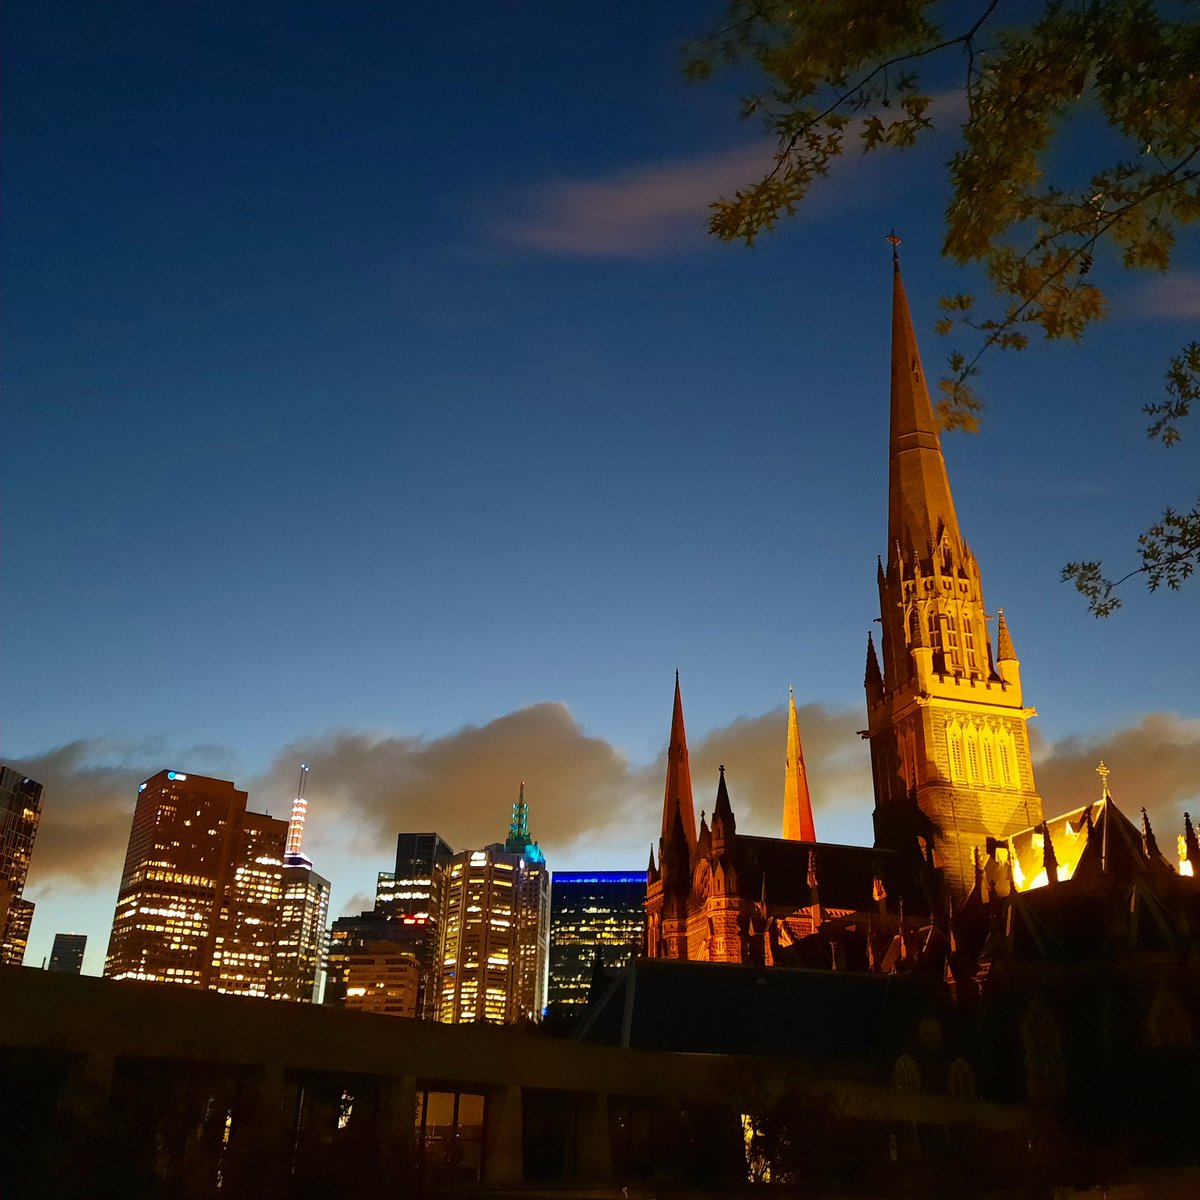 Nothing beats a summer's night stroll in @cityofmelbourne.

#Melbourne #EveryBitDifferent